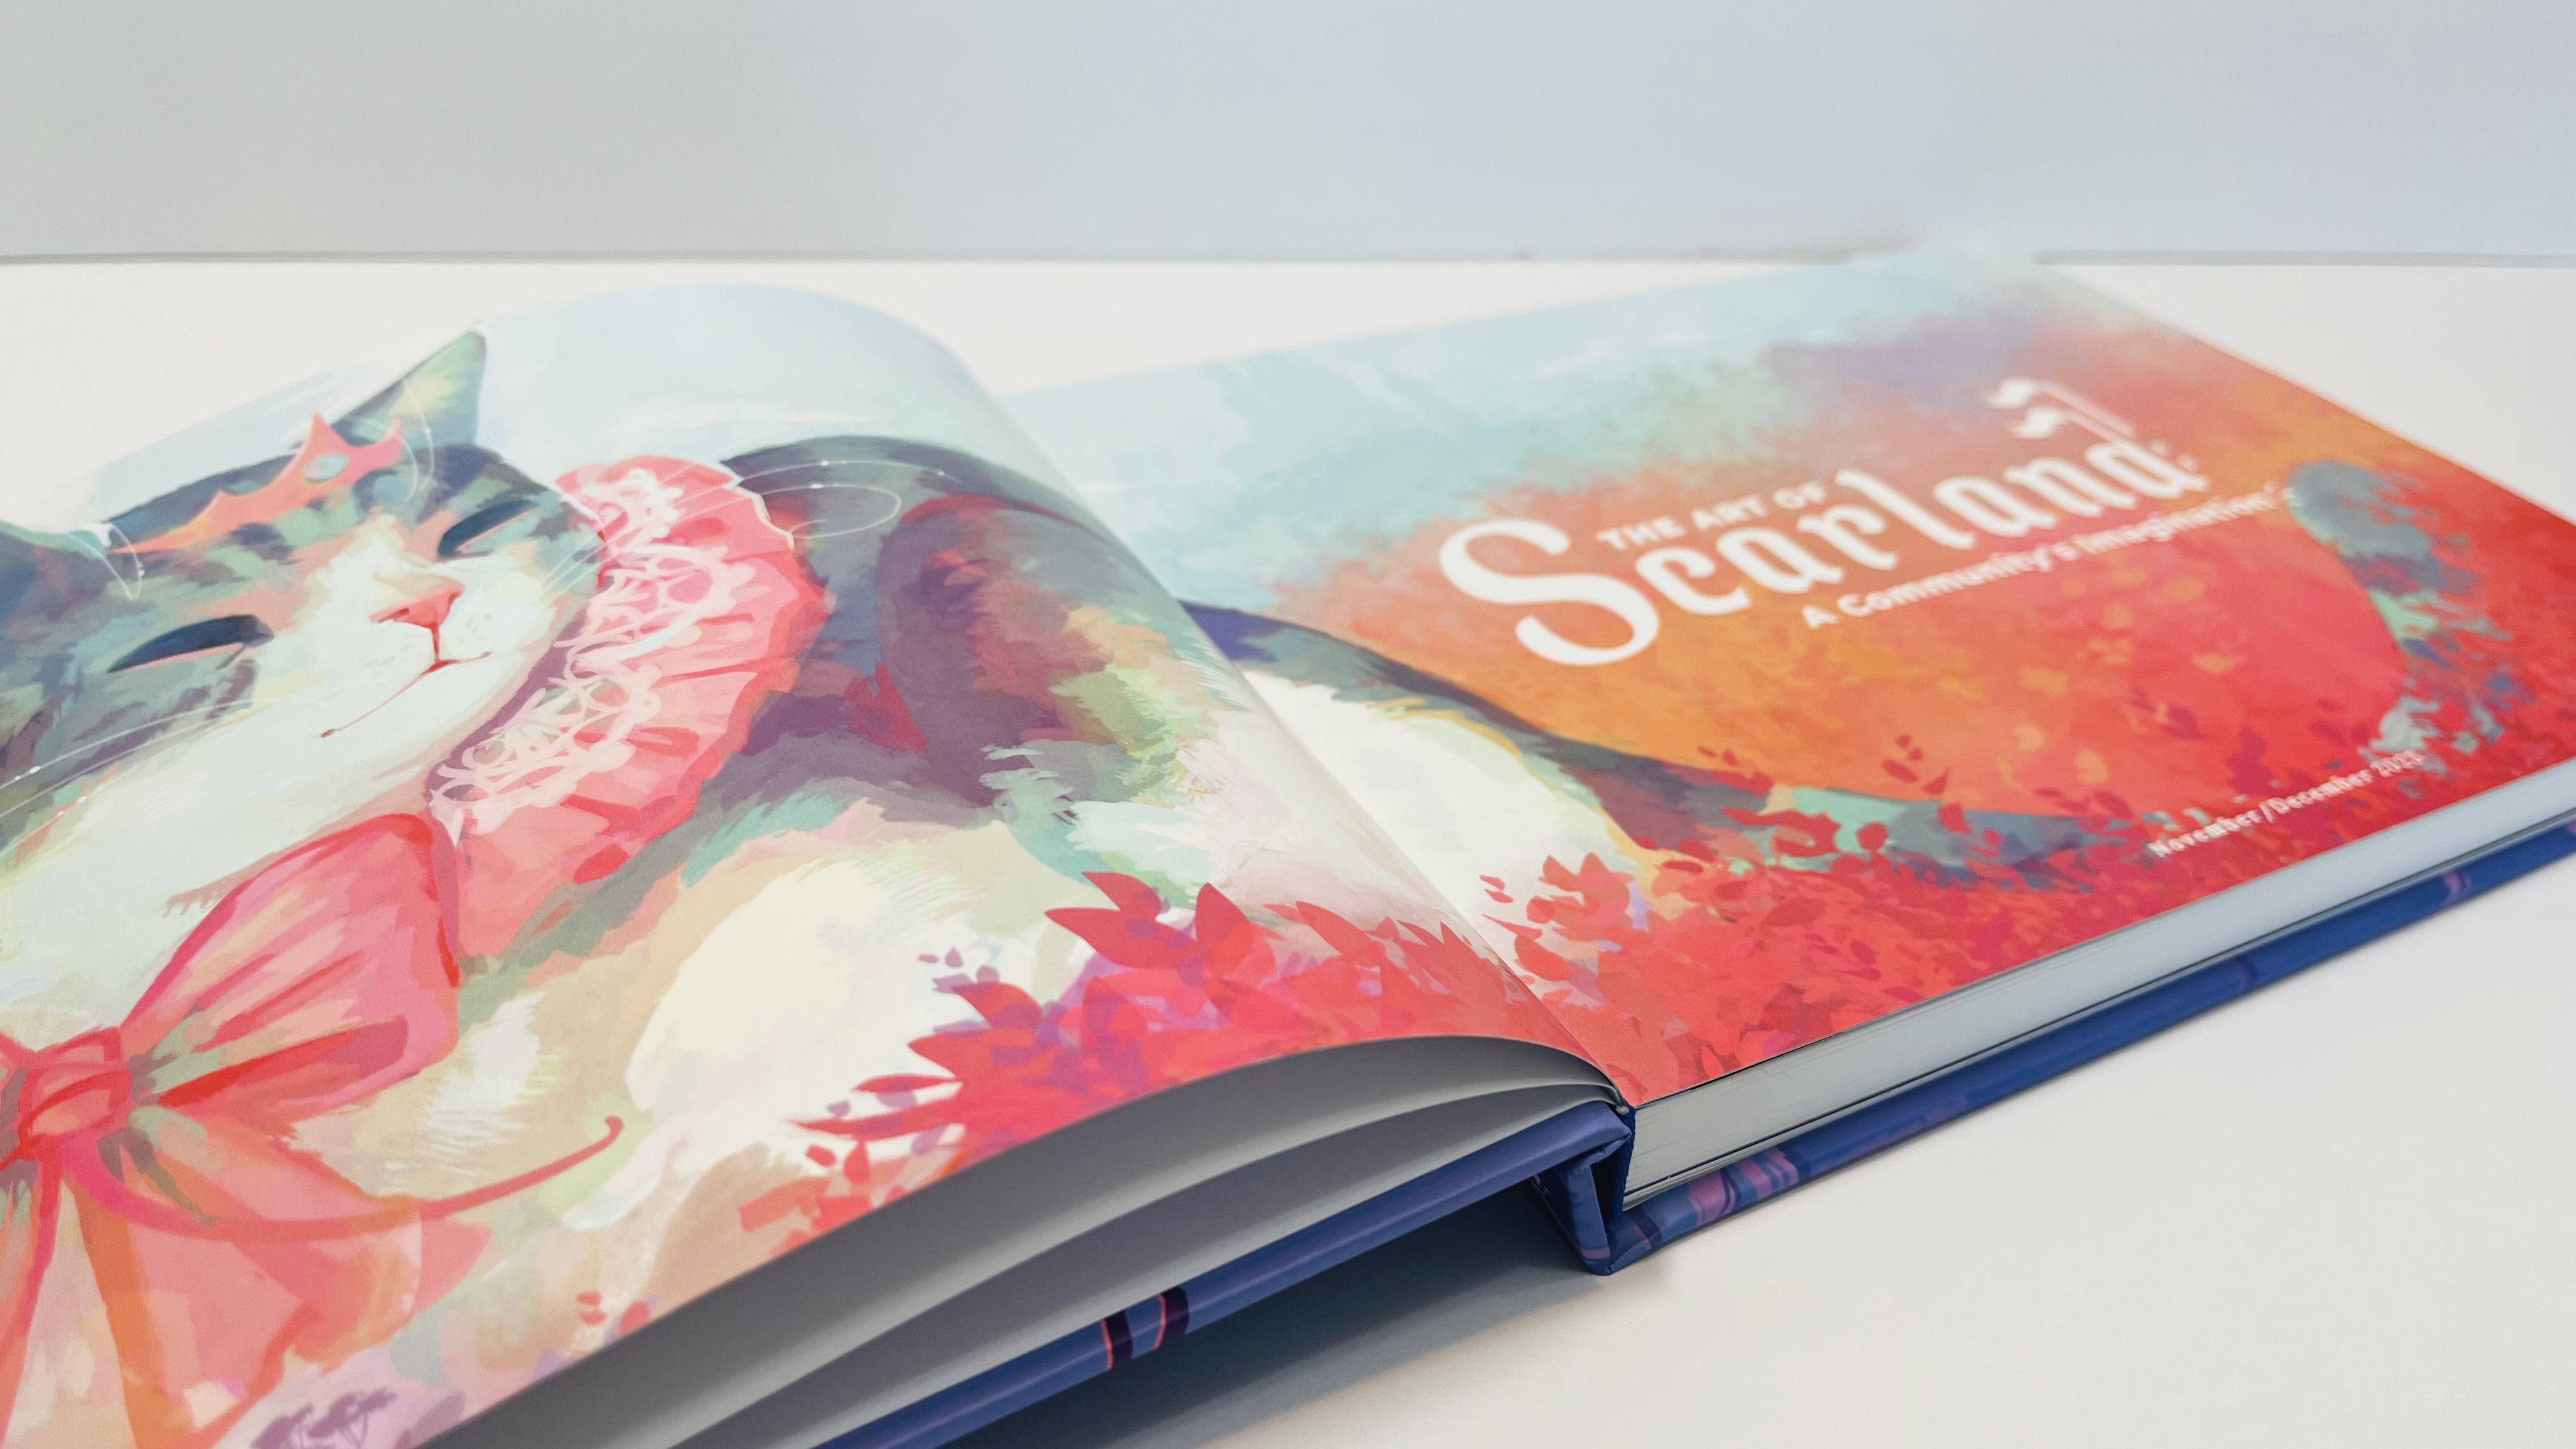 The Scarland Artbook laid flat on a white surface with a white background. It is open to two of the first pages. The pages showcase a beautiful Queen Jellie illustration by Julia Cocoabats, and the title text reads, 